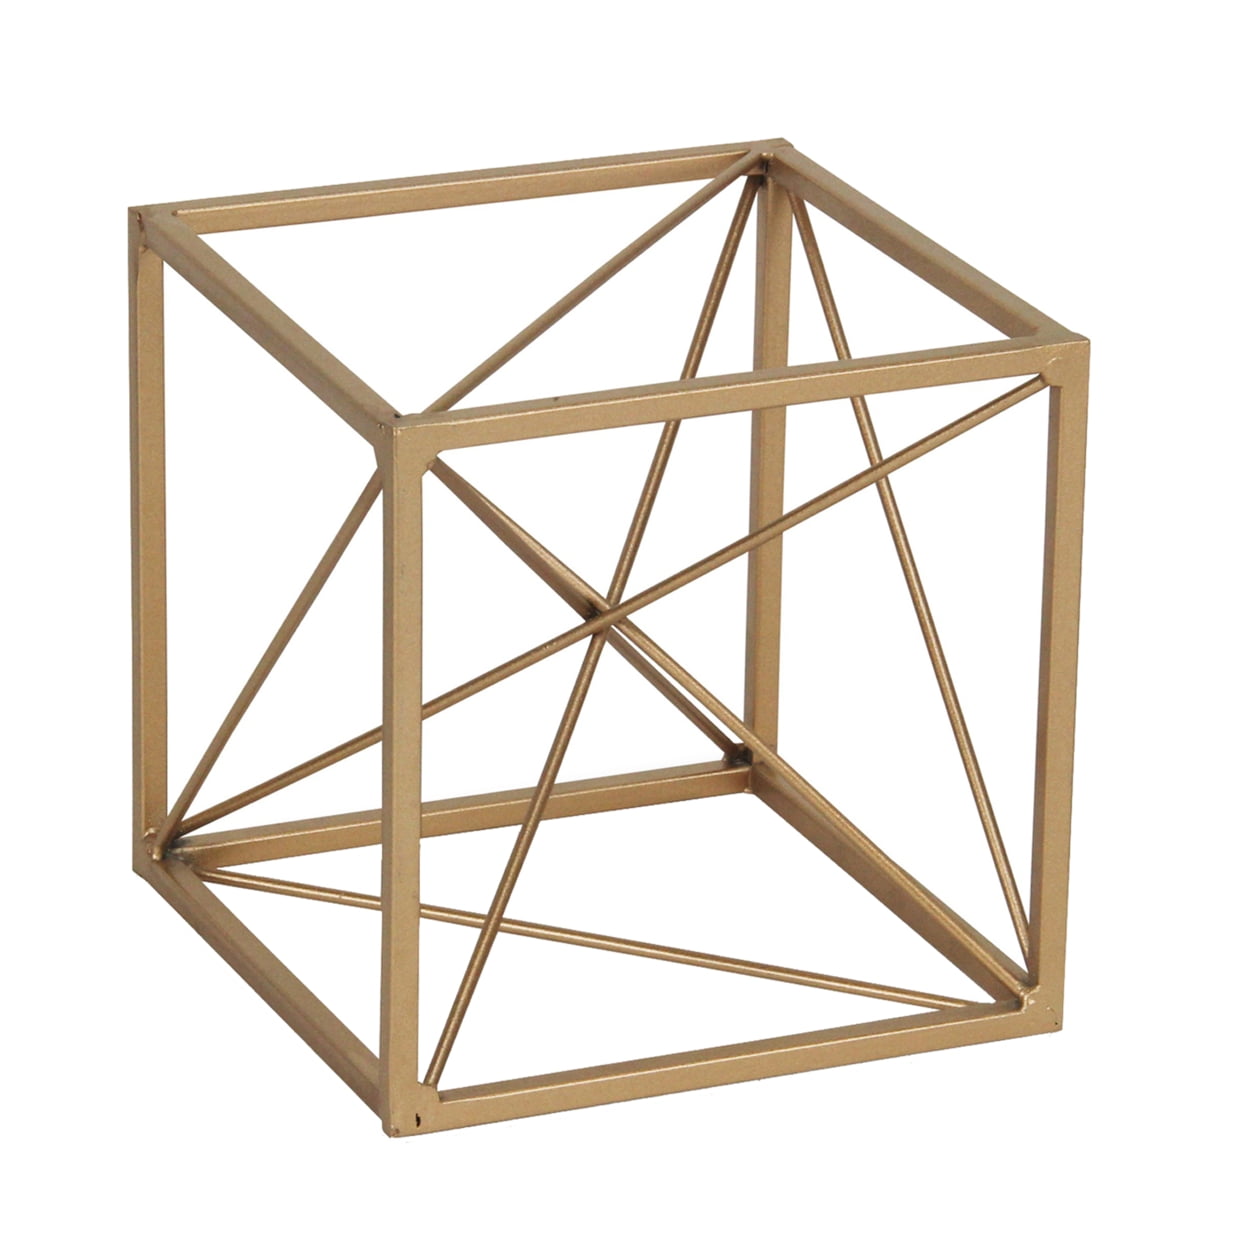 4738s Decorative Golden Cube With Abstract Center Design, Small